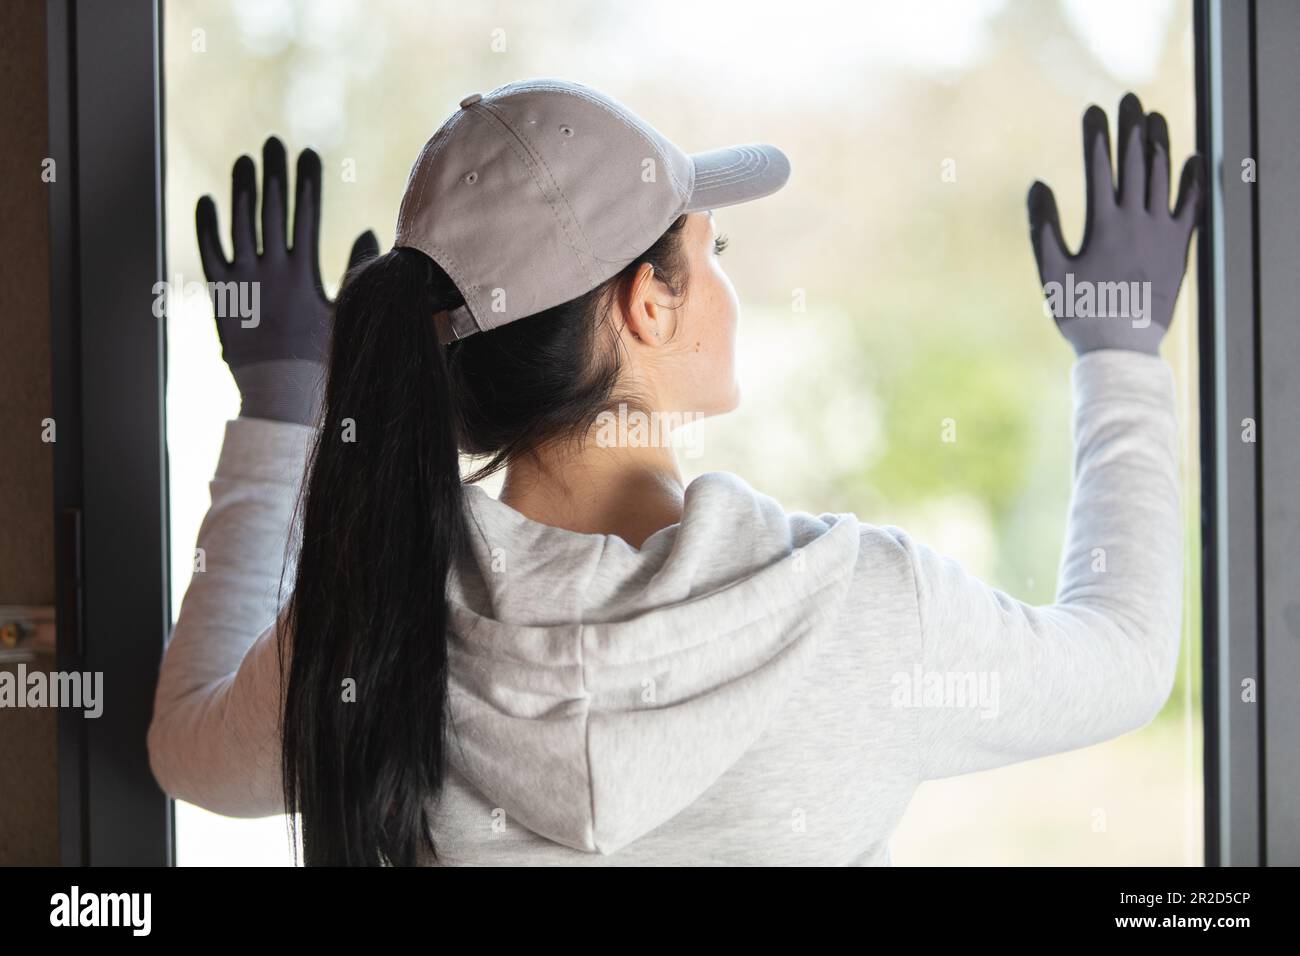 young woman working at construction site Stock Photo